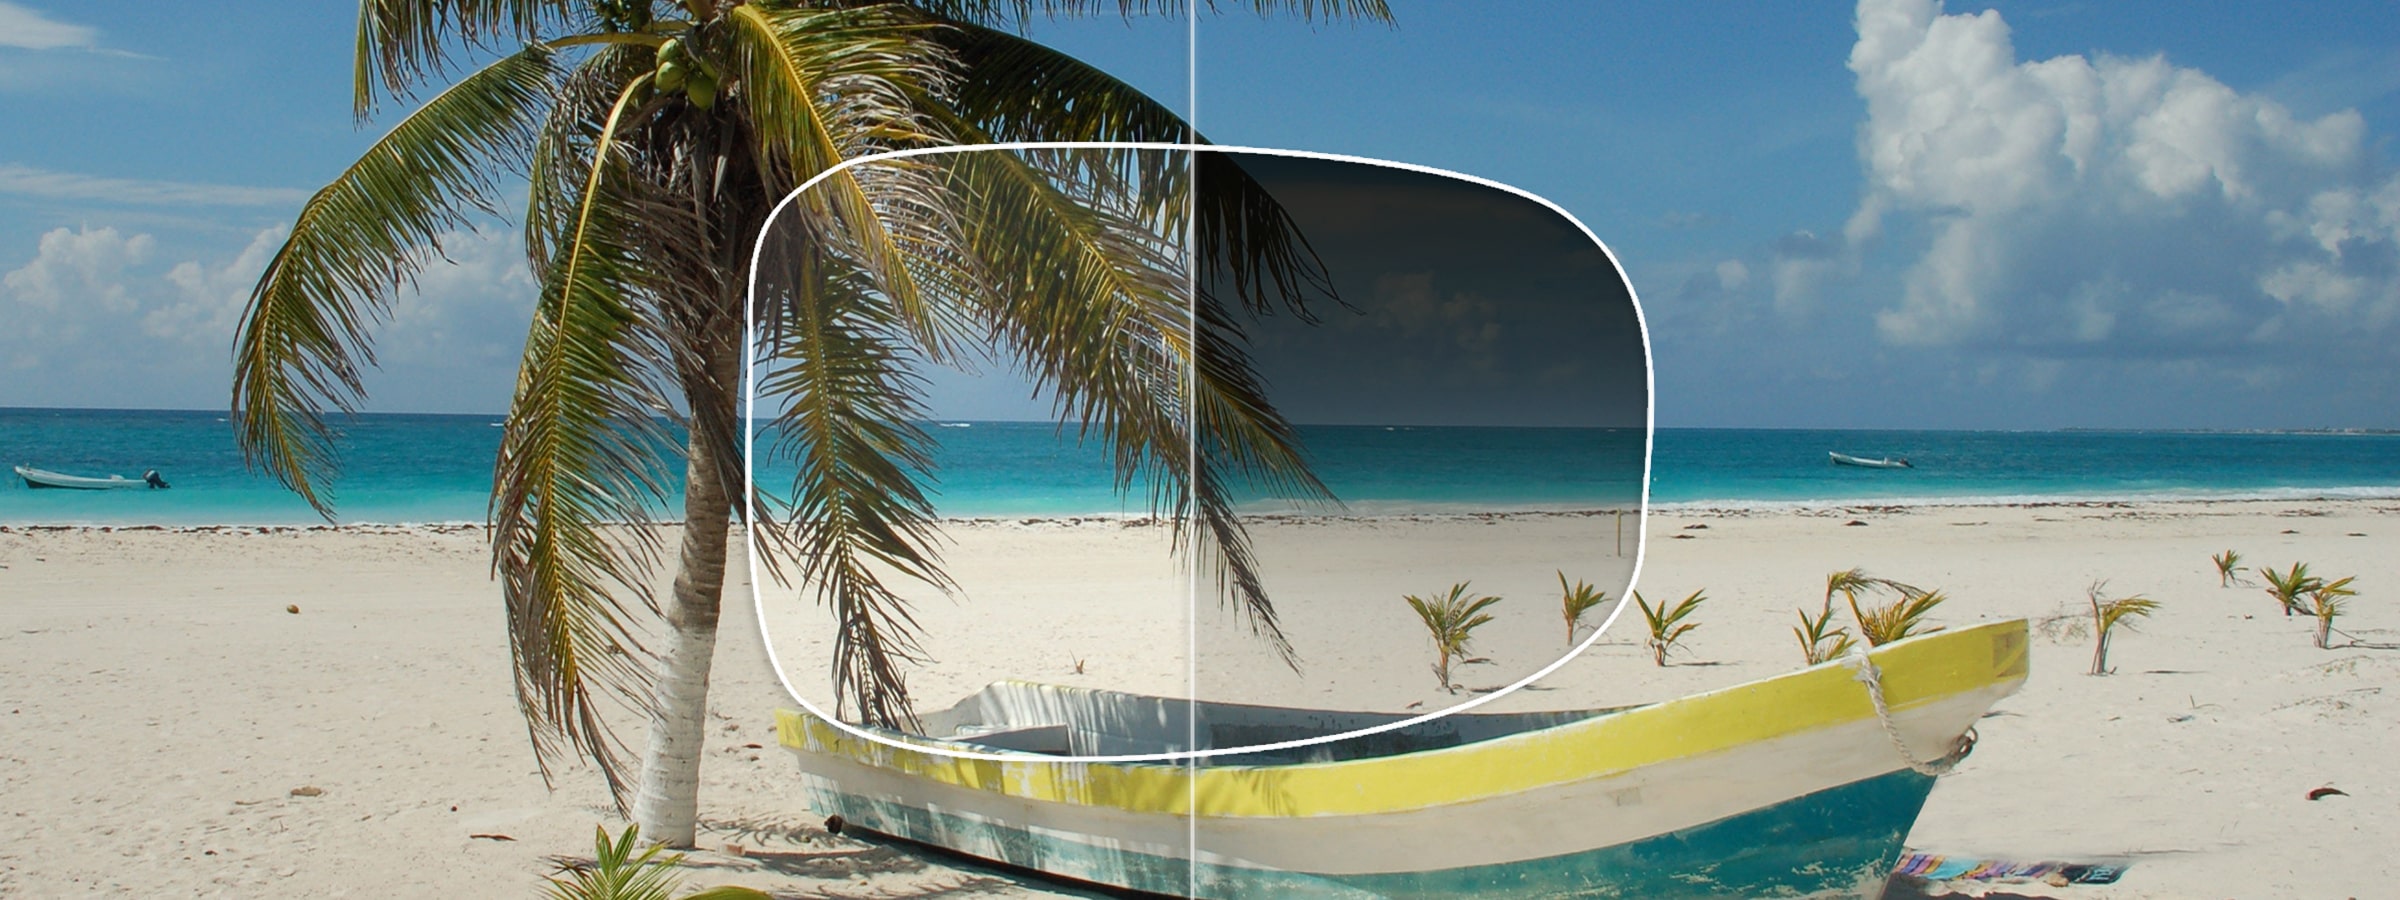 View of a sunny beach through a lens with and without a gradient tint